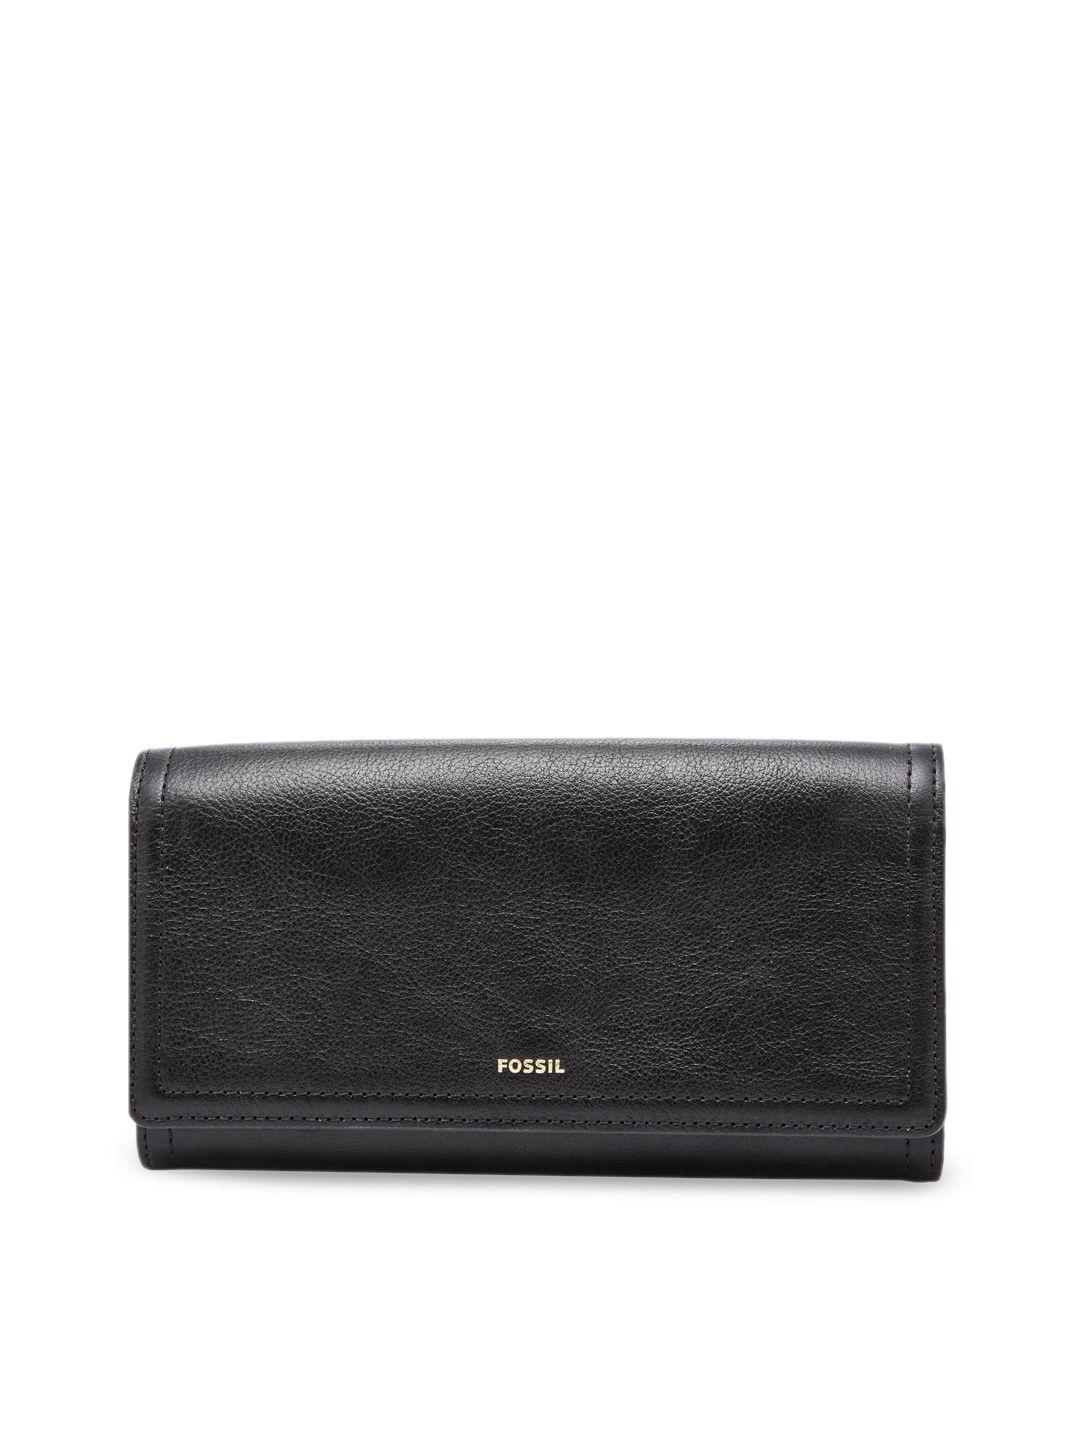 fossil black solid leather clutch